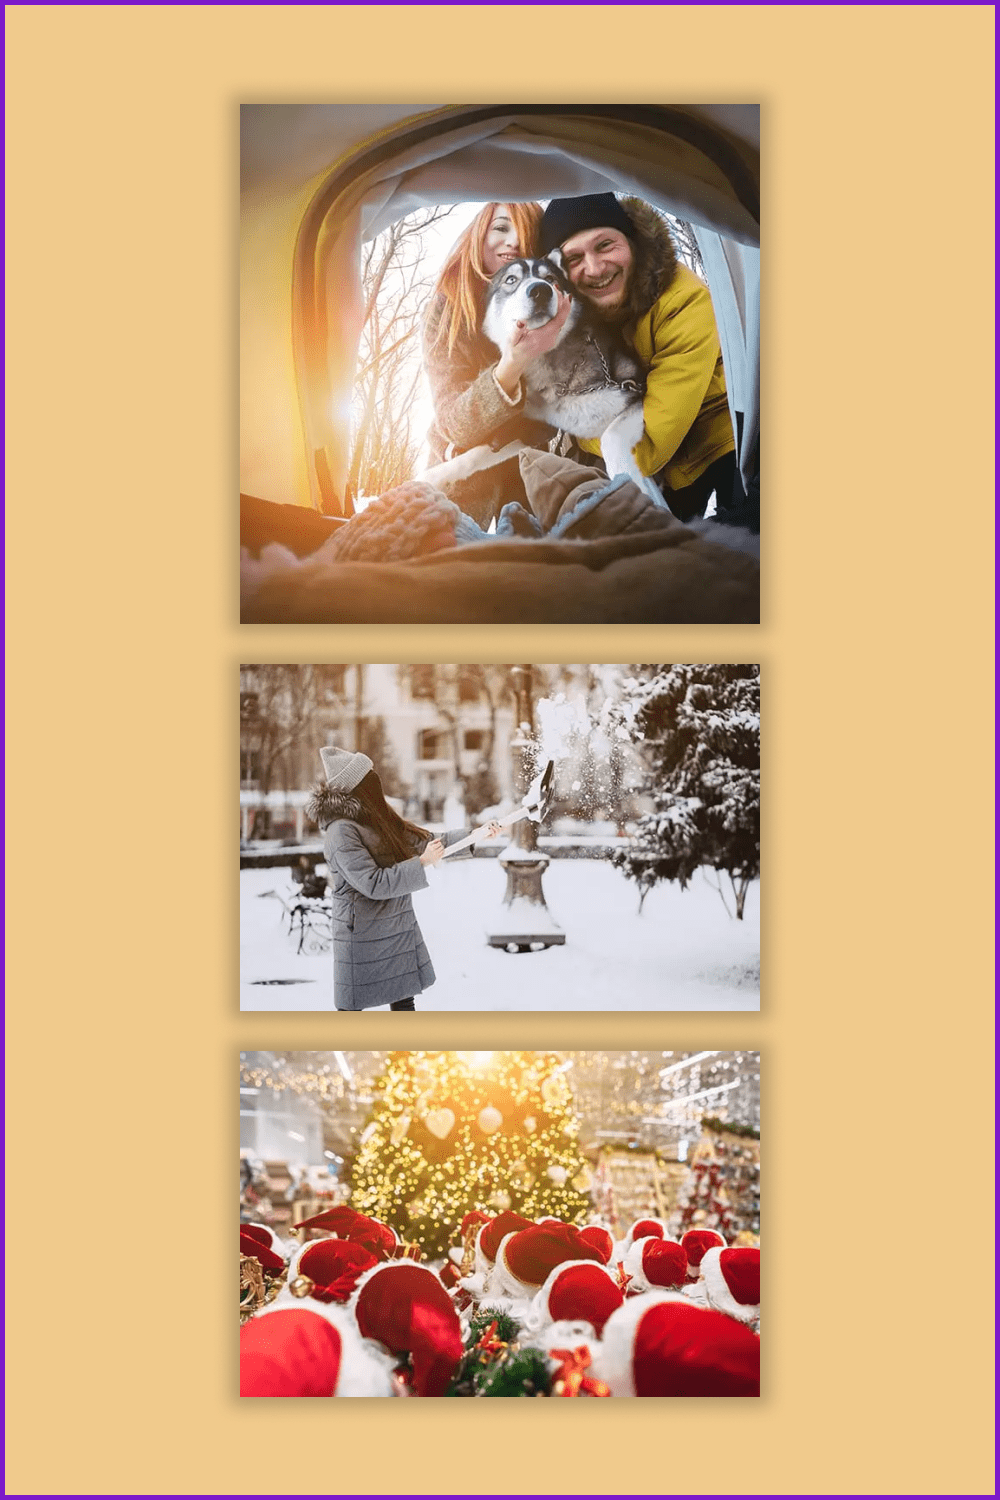 Photo collage of Christmas events with snow and Santa Clauses.